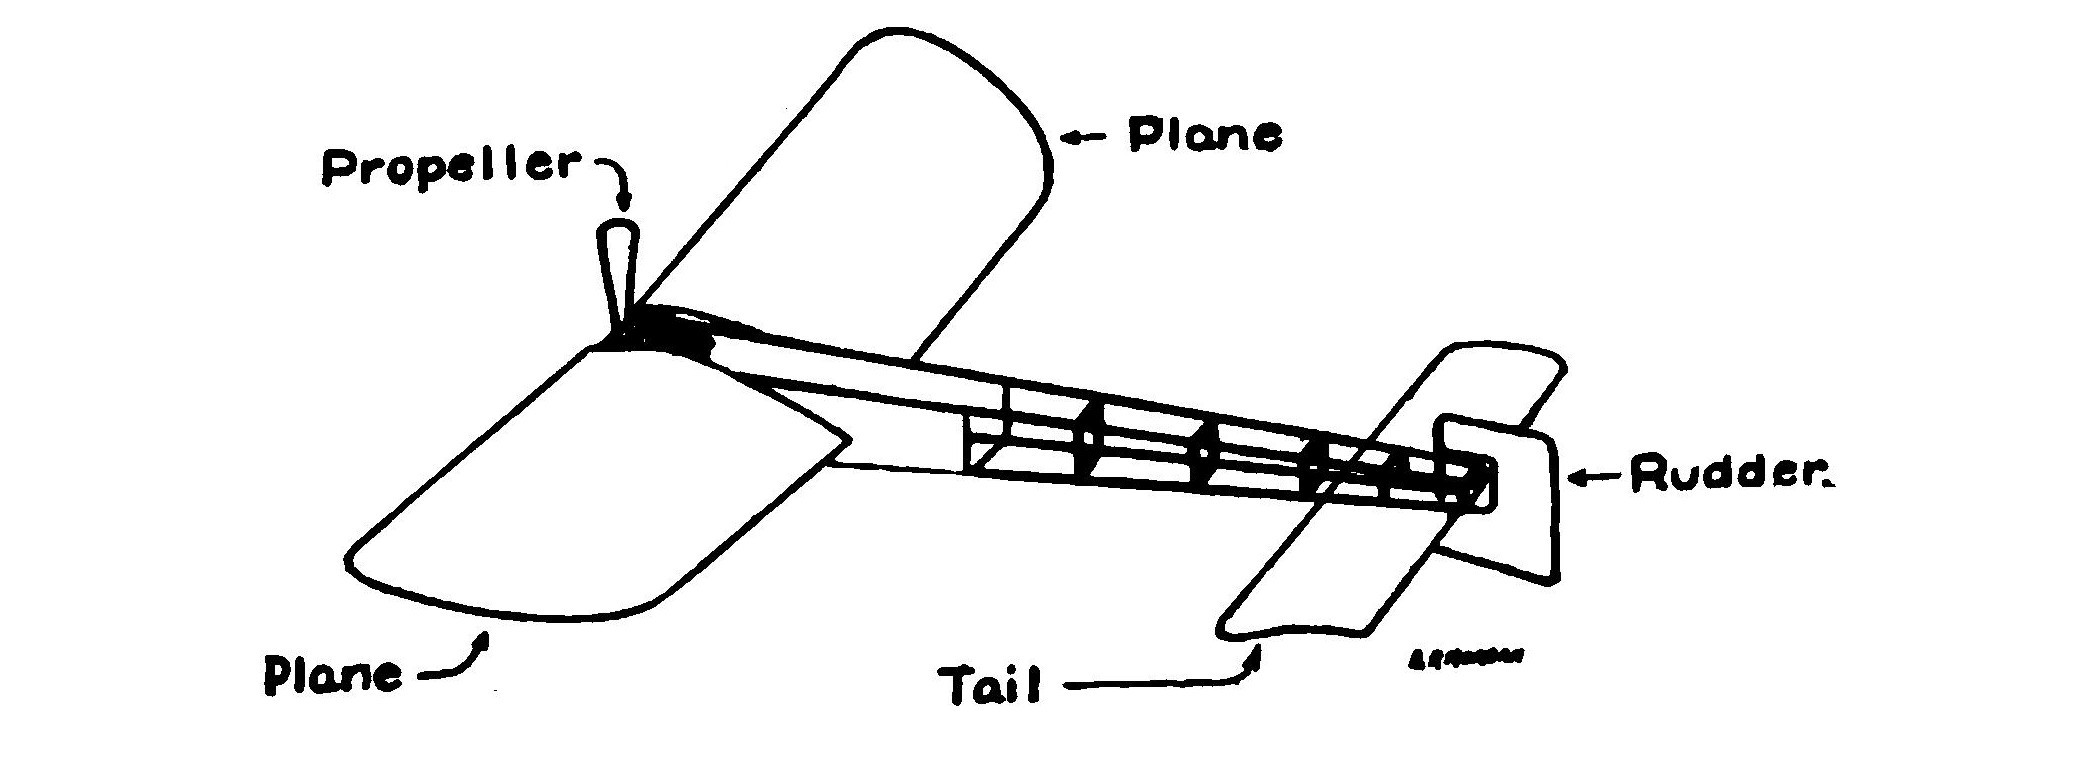 FIG. 2. Diagram representing a typical monoplane.